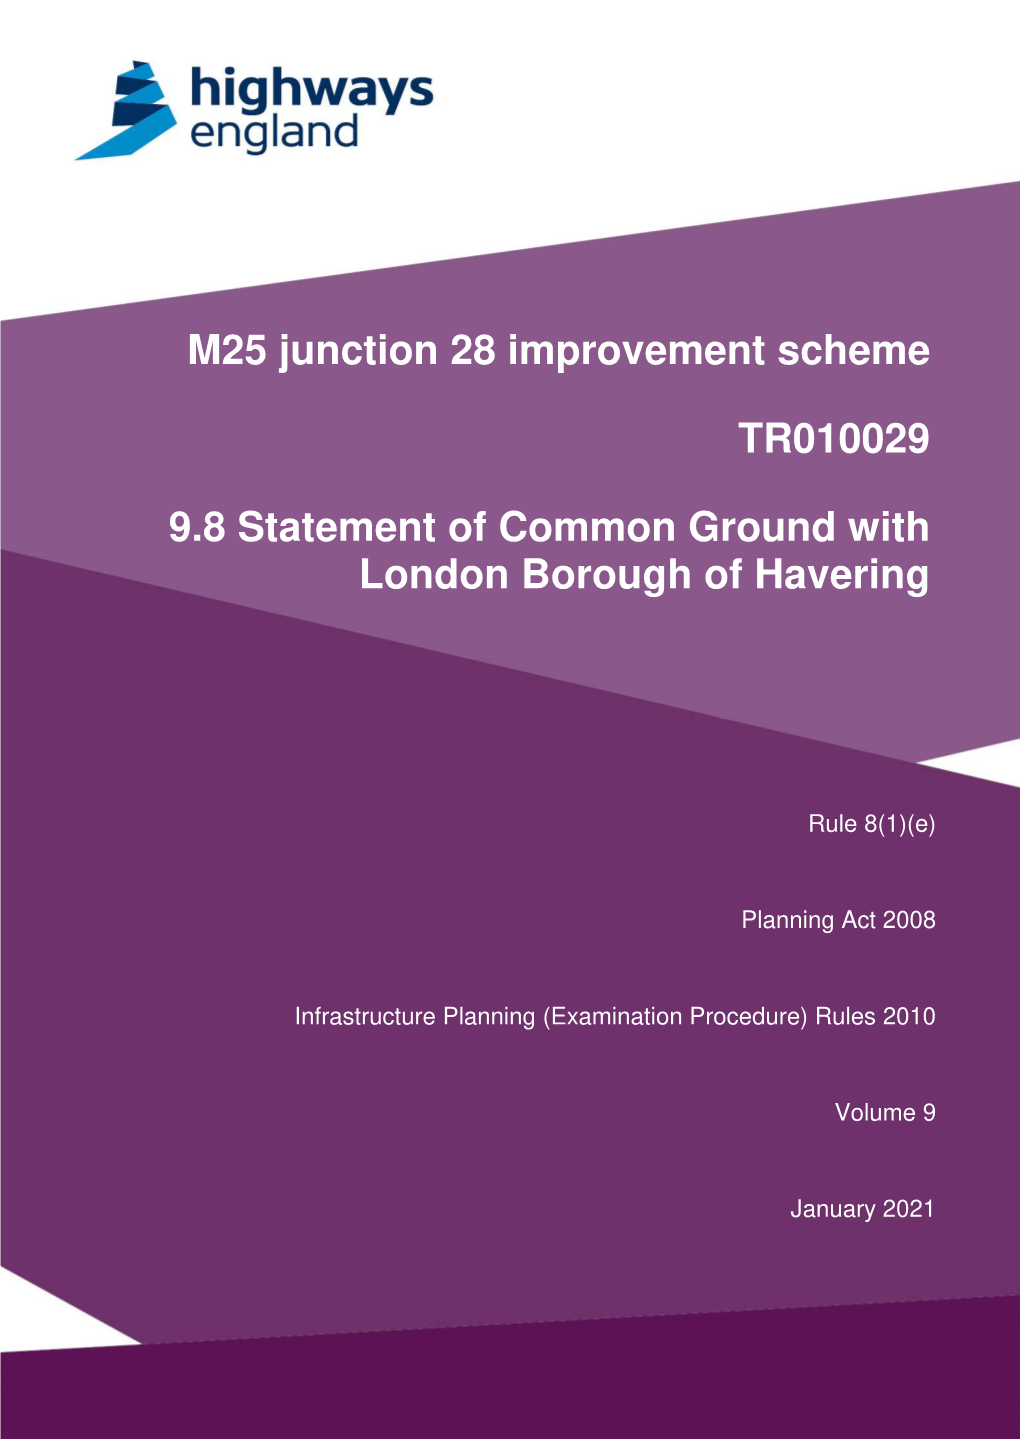 M25 Junction 28 Improvement Scheme TR010029 9.8 Statement of Common Ground with London Borough of Havering